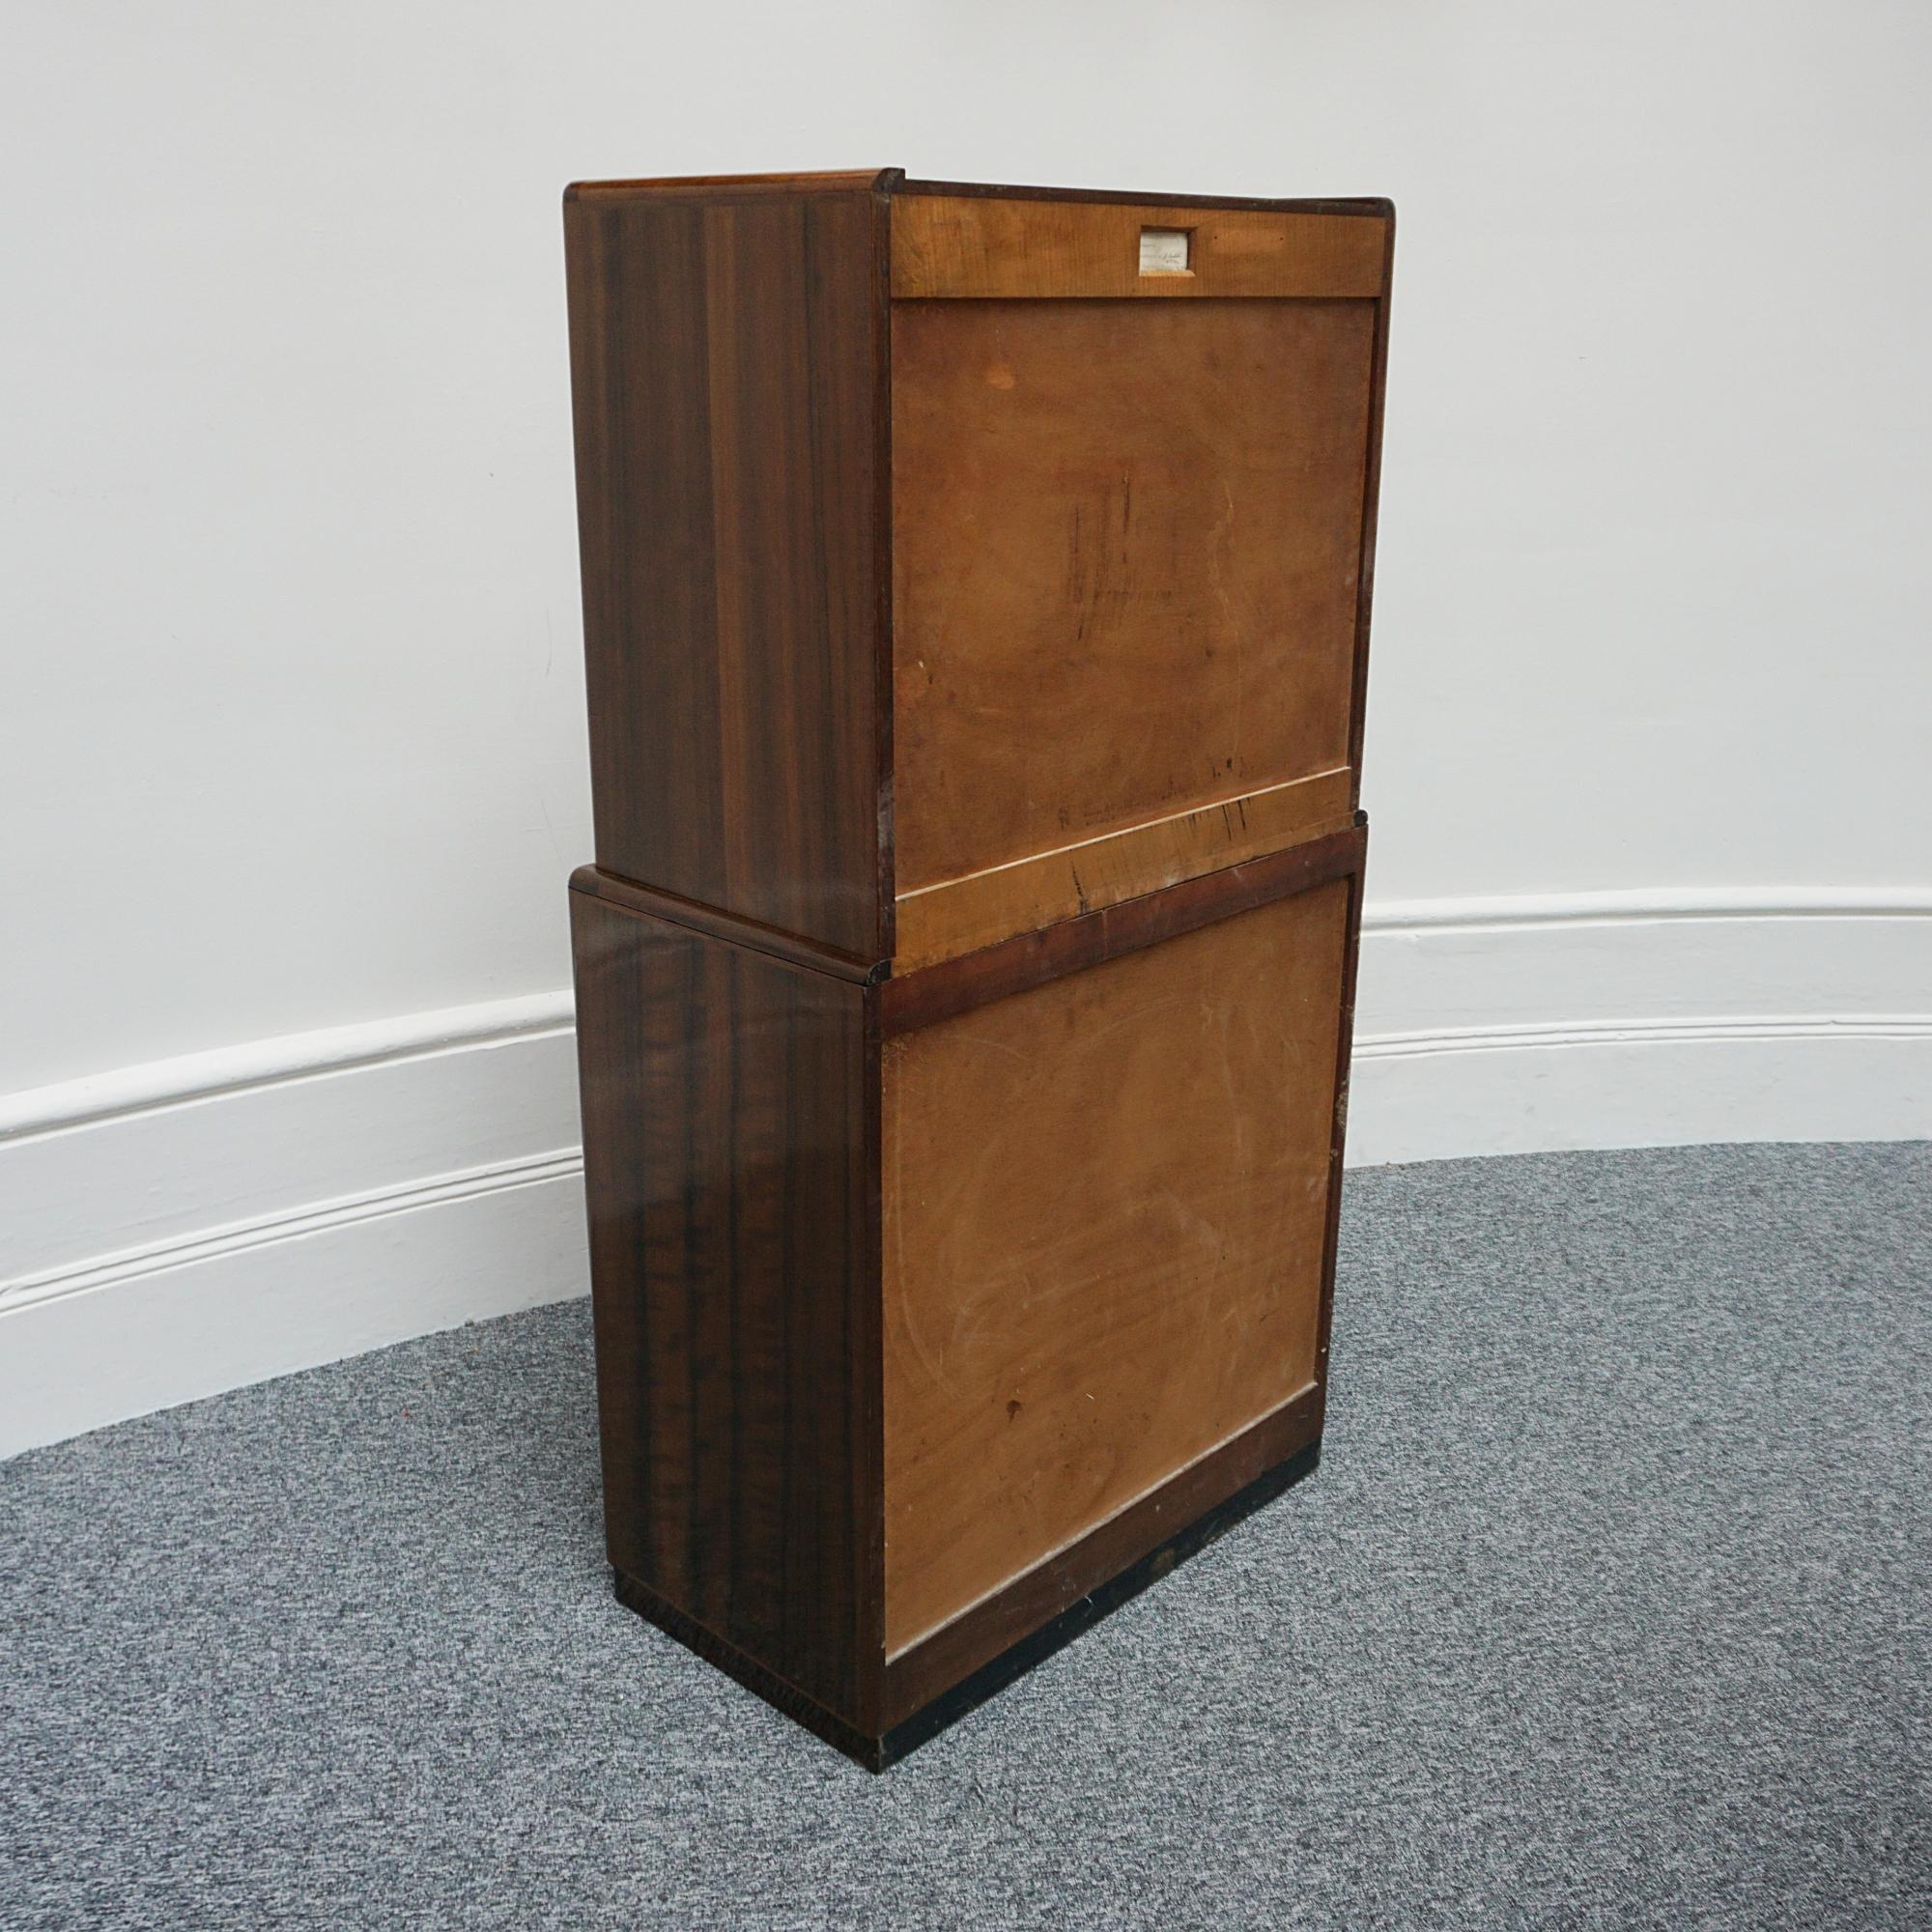 An Art Deco Linen cupboard by Betty Joel. Australian walnut veneered on mahogany with satin birch interior. Upper cupboard section with shelved interior and lower three pull out drawers. Original chrome handles. Designer and makers label to the